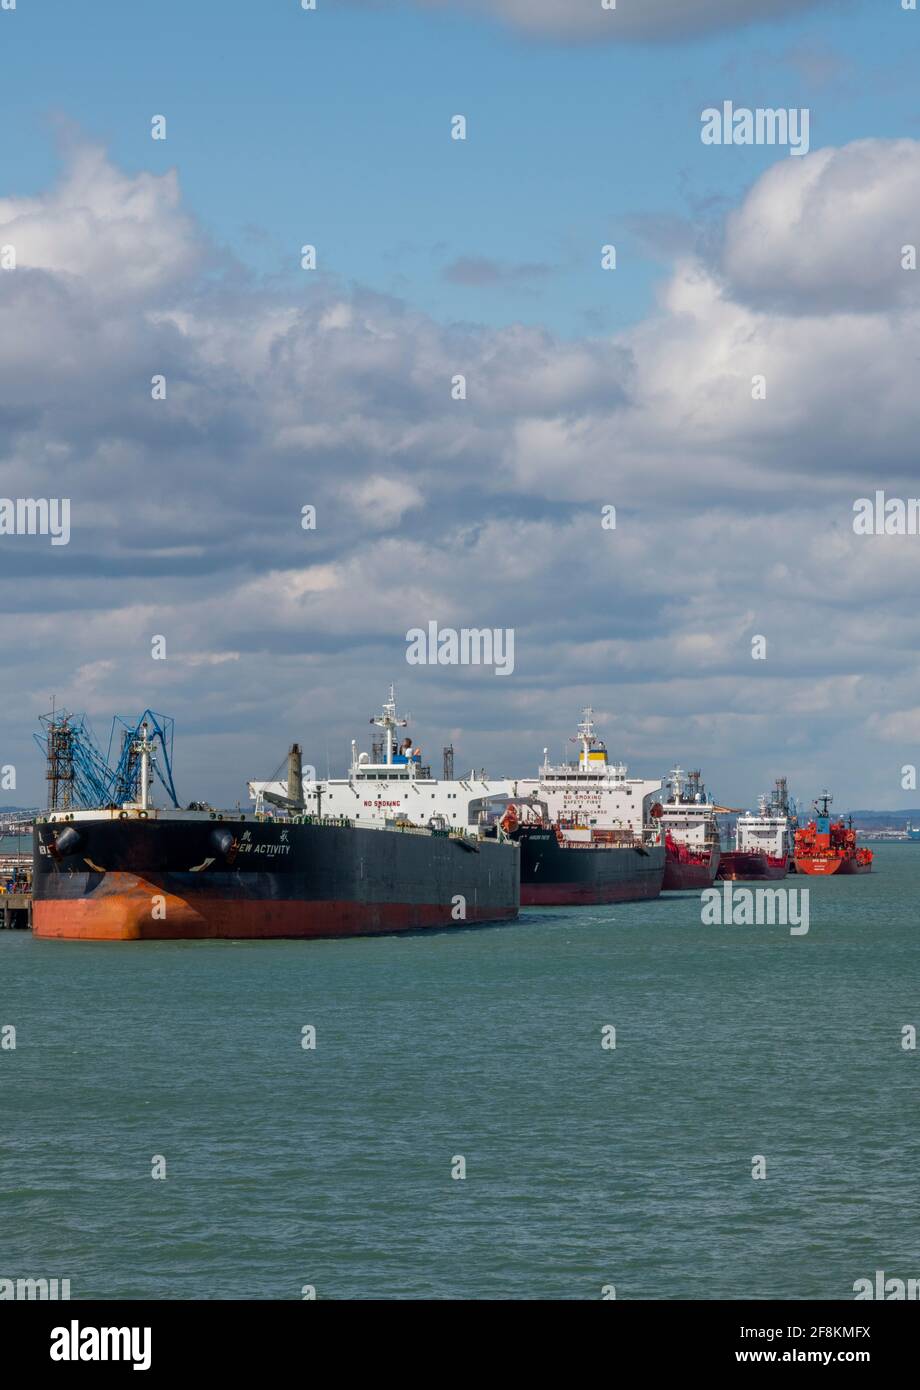 large oil tankers and ships with shipping alongside at the esso fawley marine oil refinery terminal processing plant in southampton docks. Stock Photo